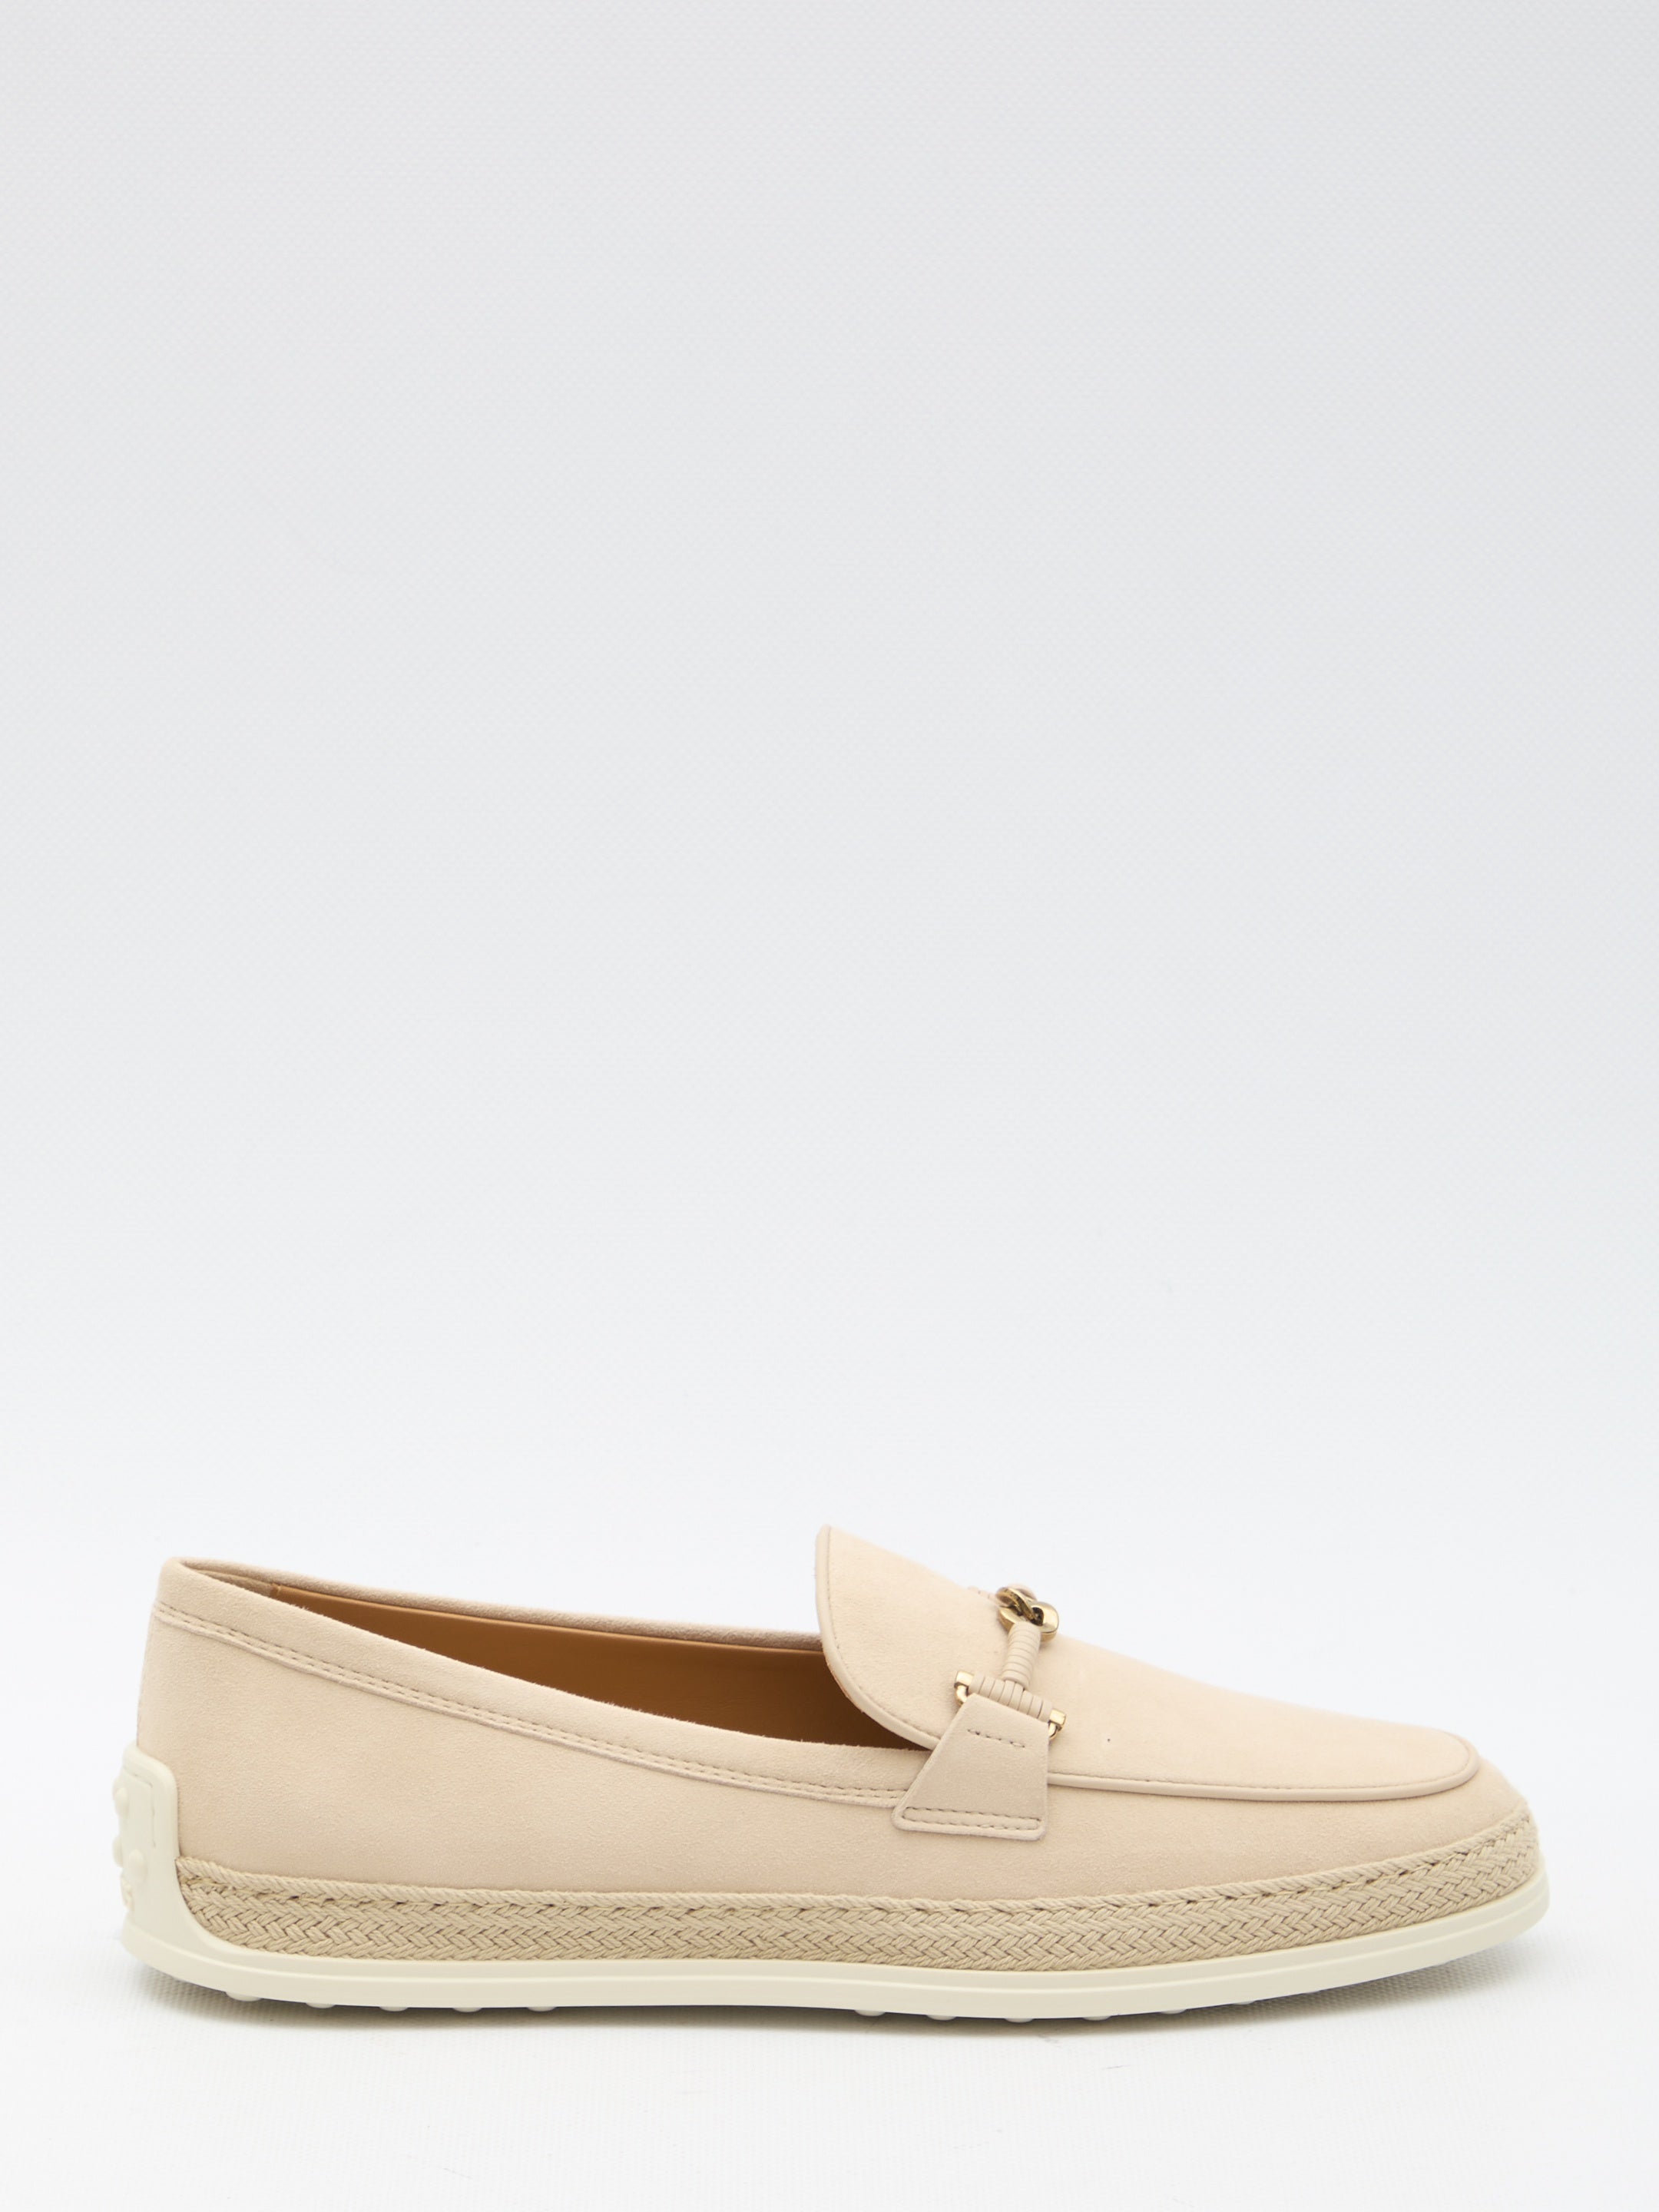 TODS-OUTLET-SALE-Suede-loafers-Flache-Schuhe-37-BEIGE-ARCHIVE-COLLECTION.jpg